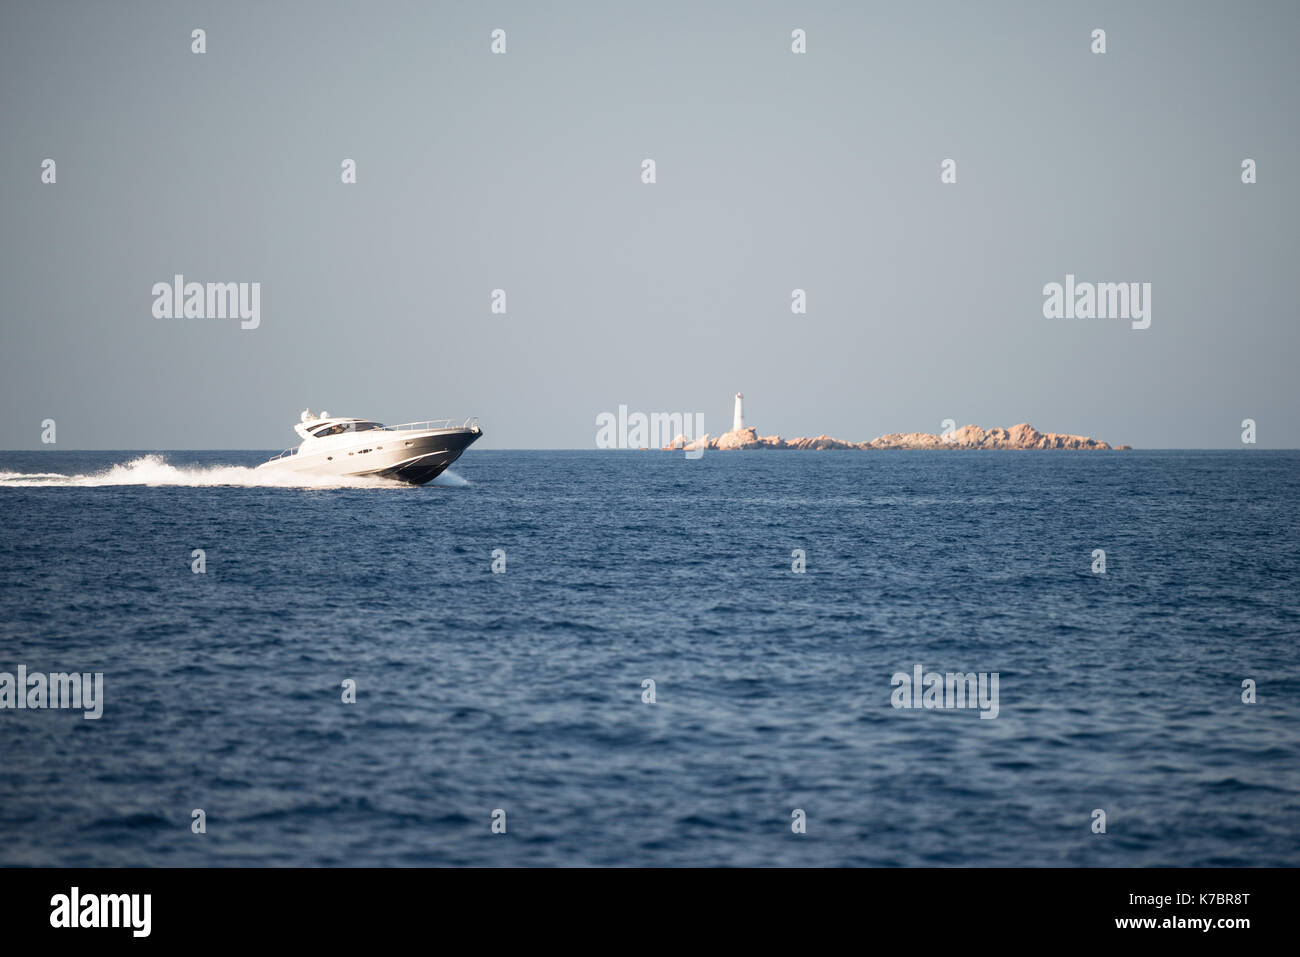 Small motor boat on sea, small island in background Stock Photo